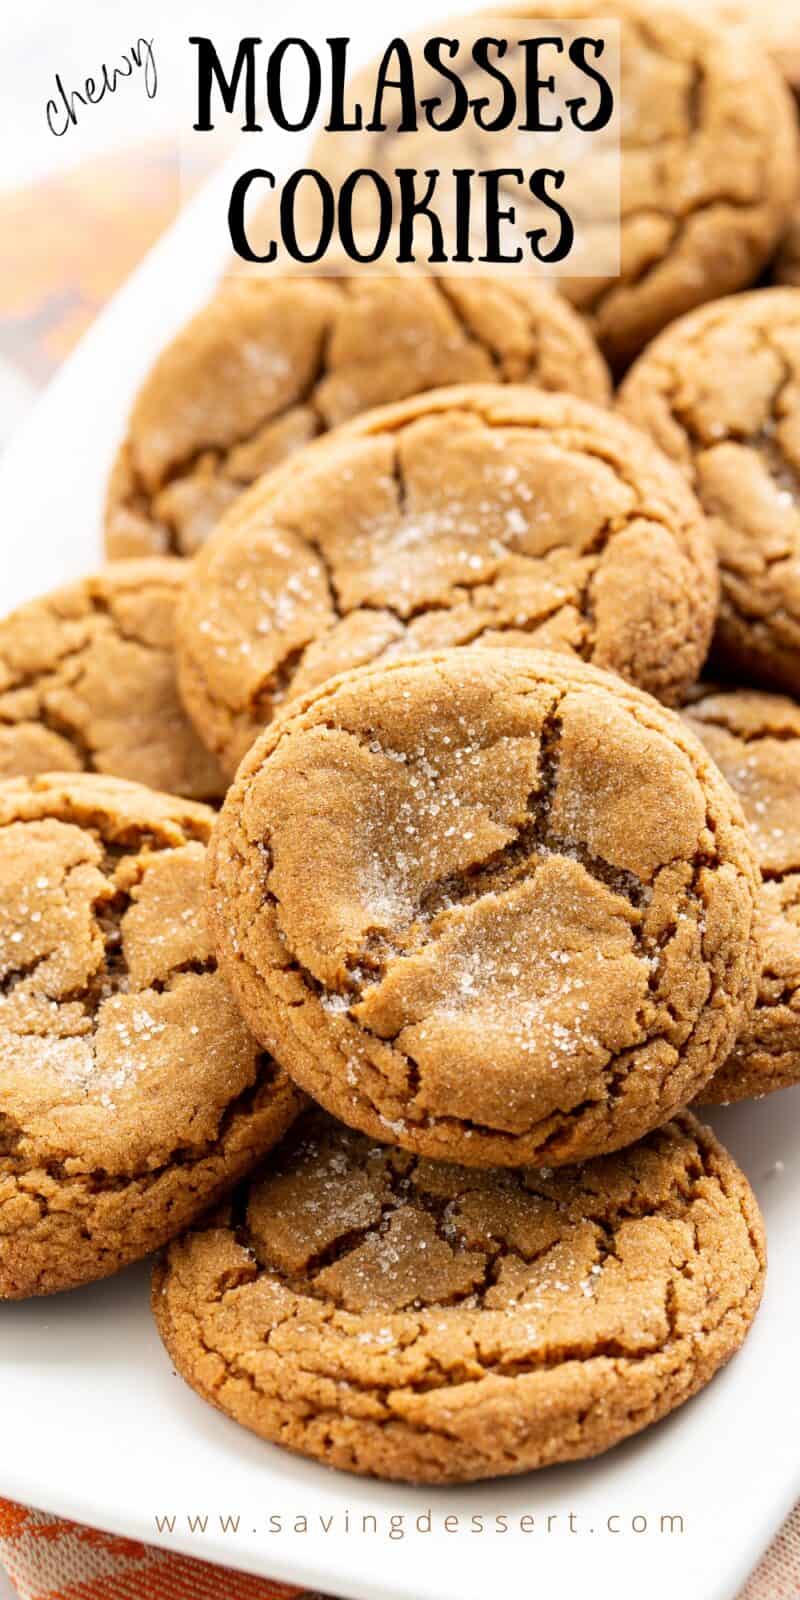 A platter of crackled molasses cookies